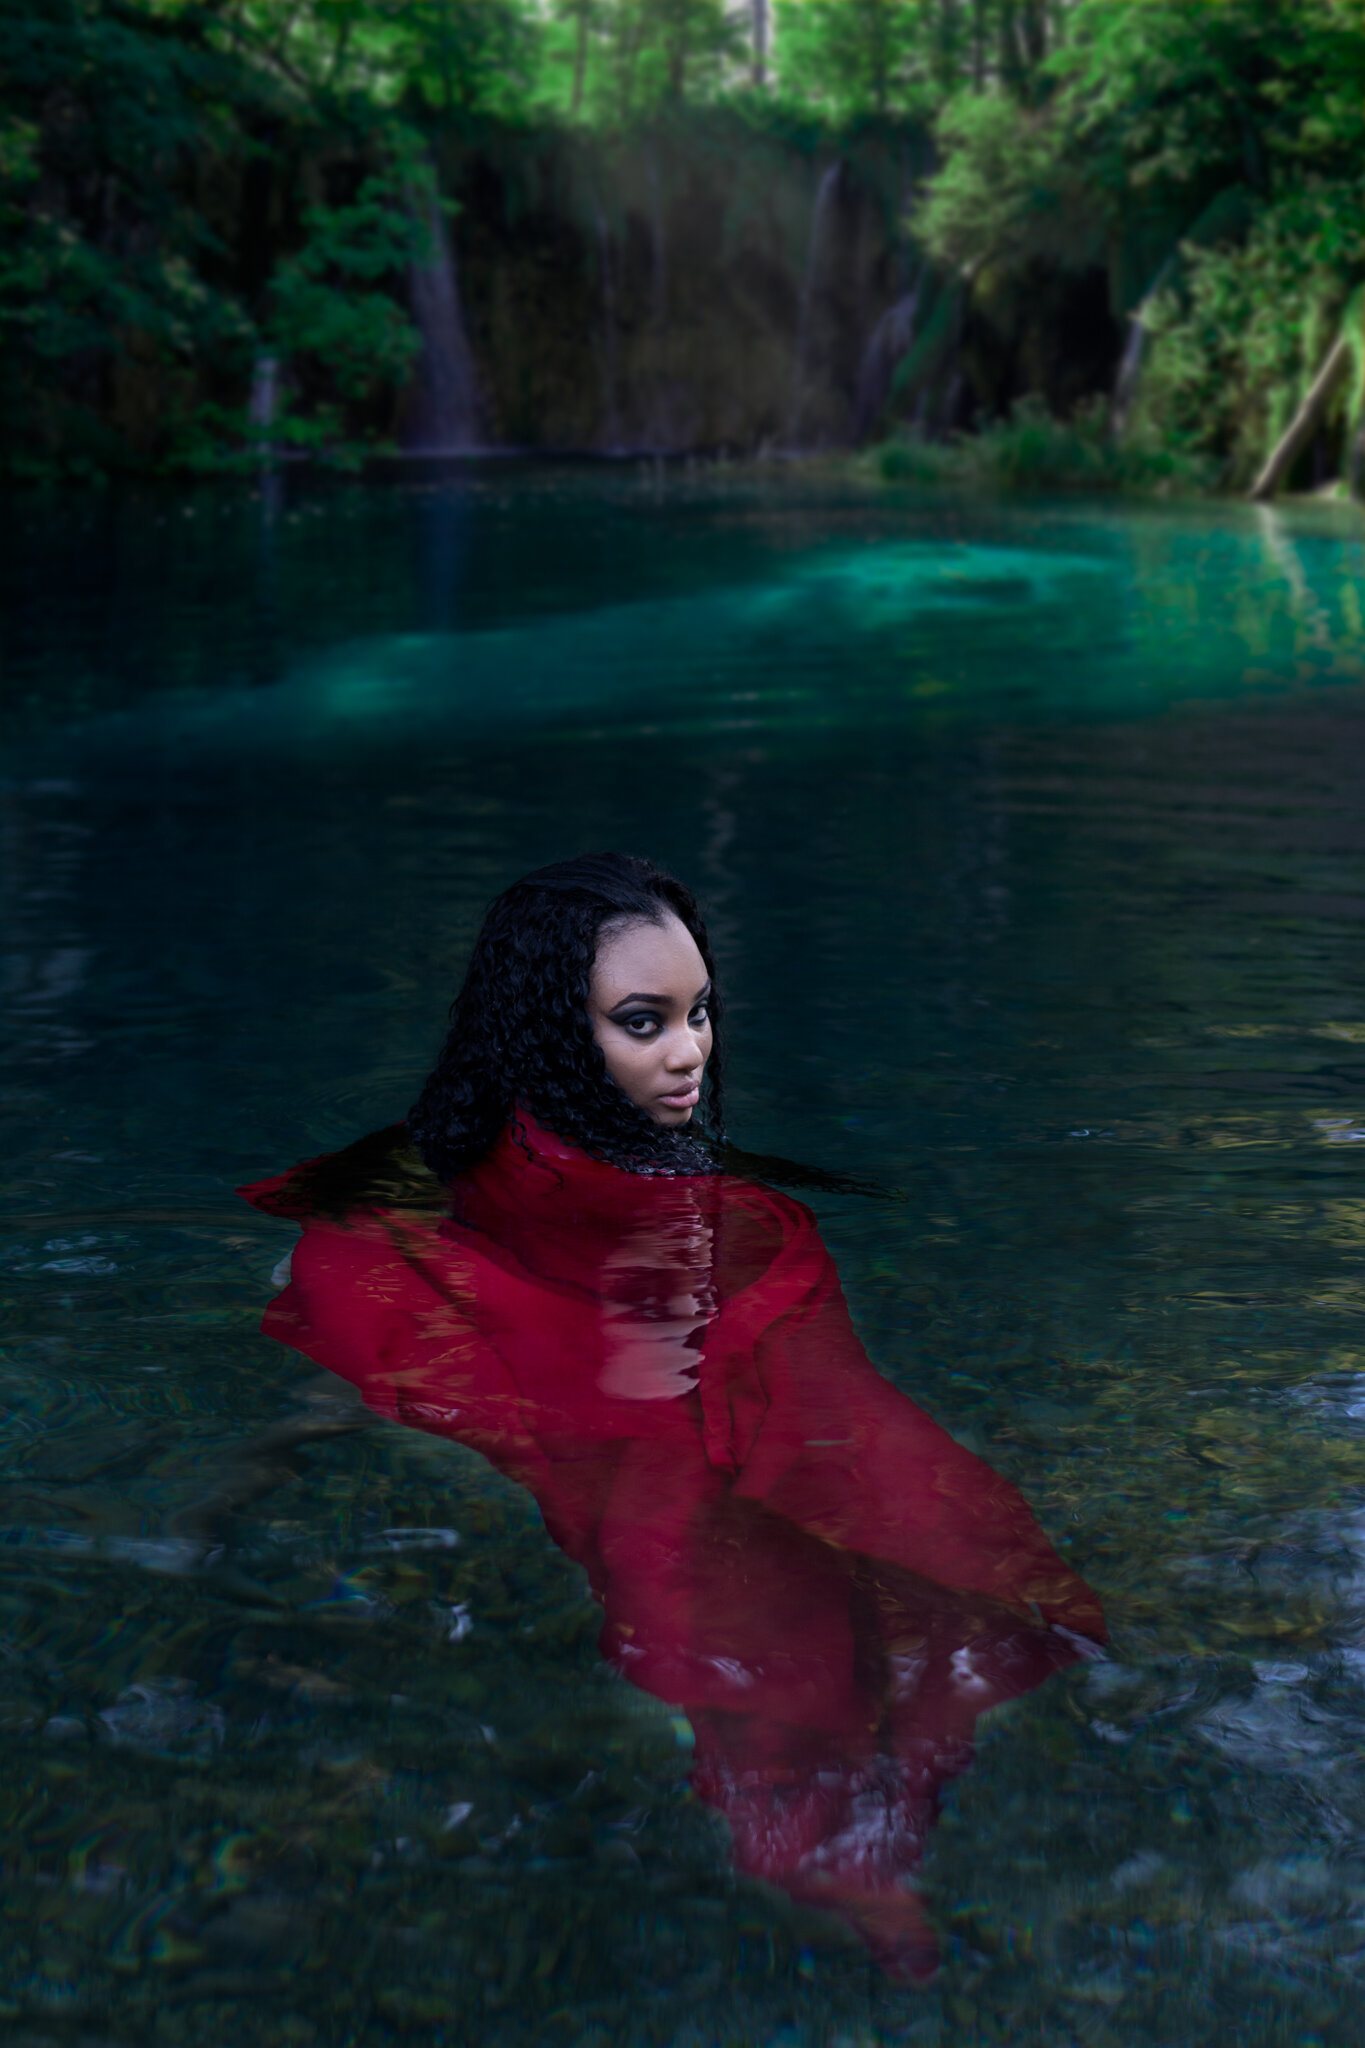 dark conceptual photoshoot in water with red dress